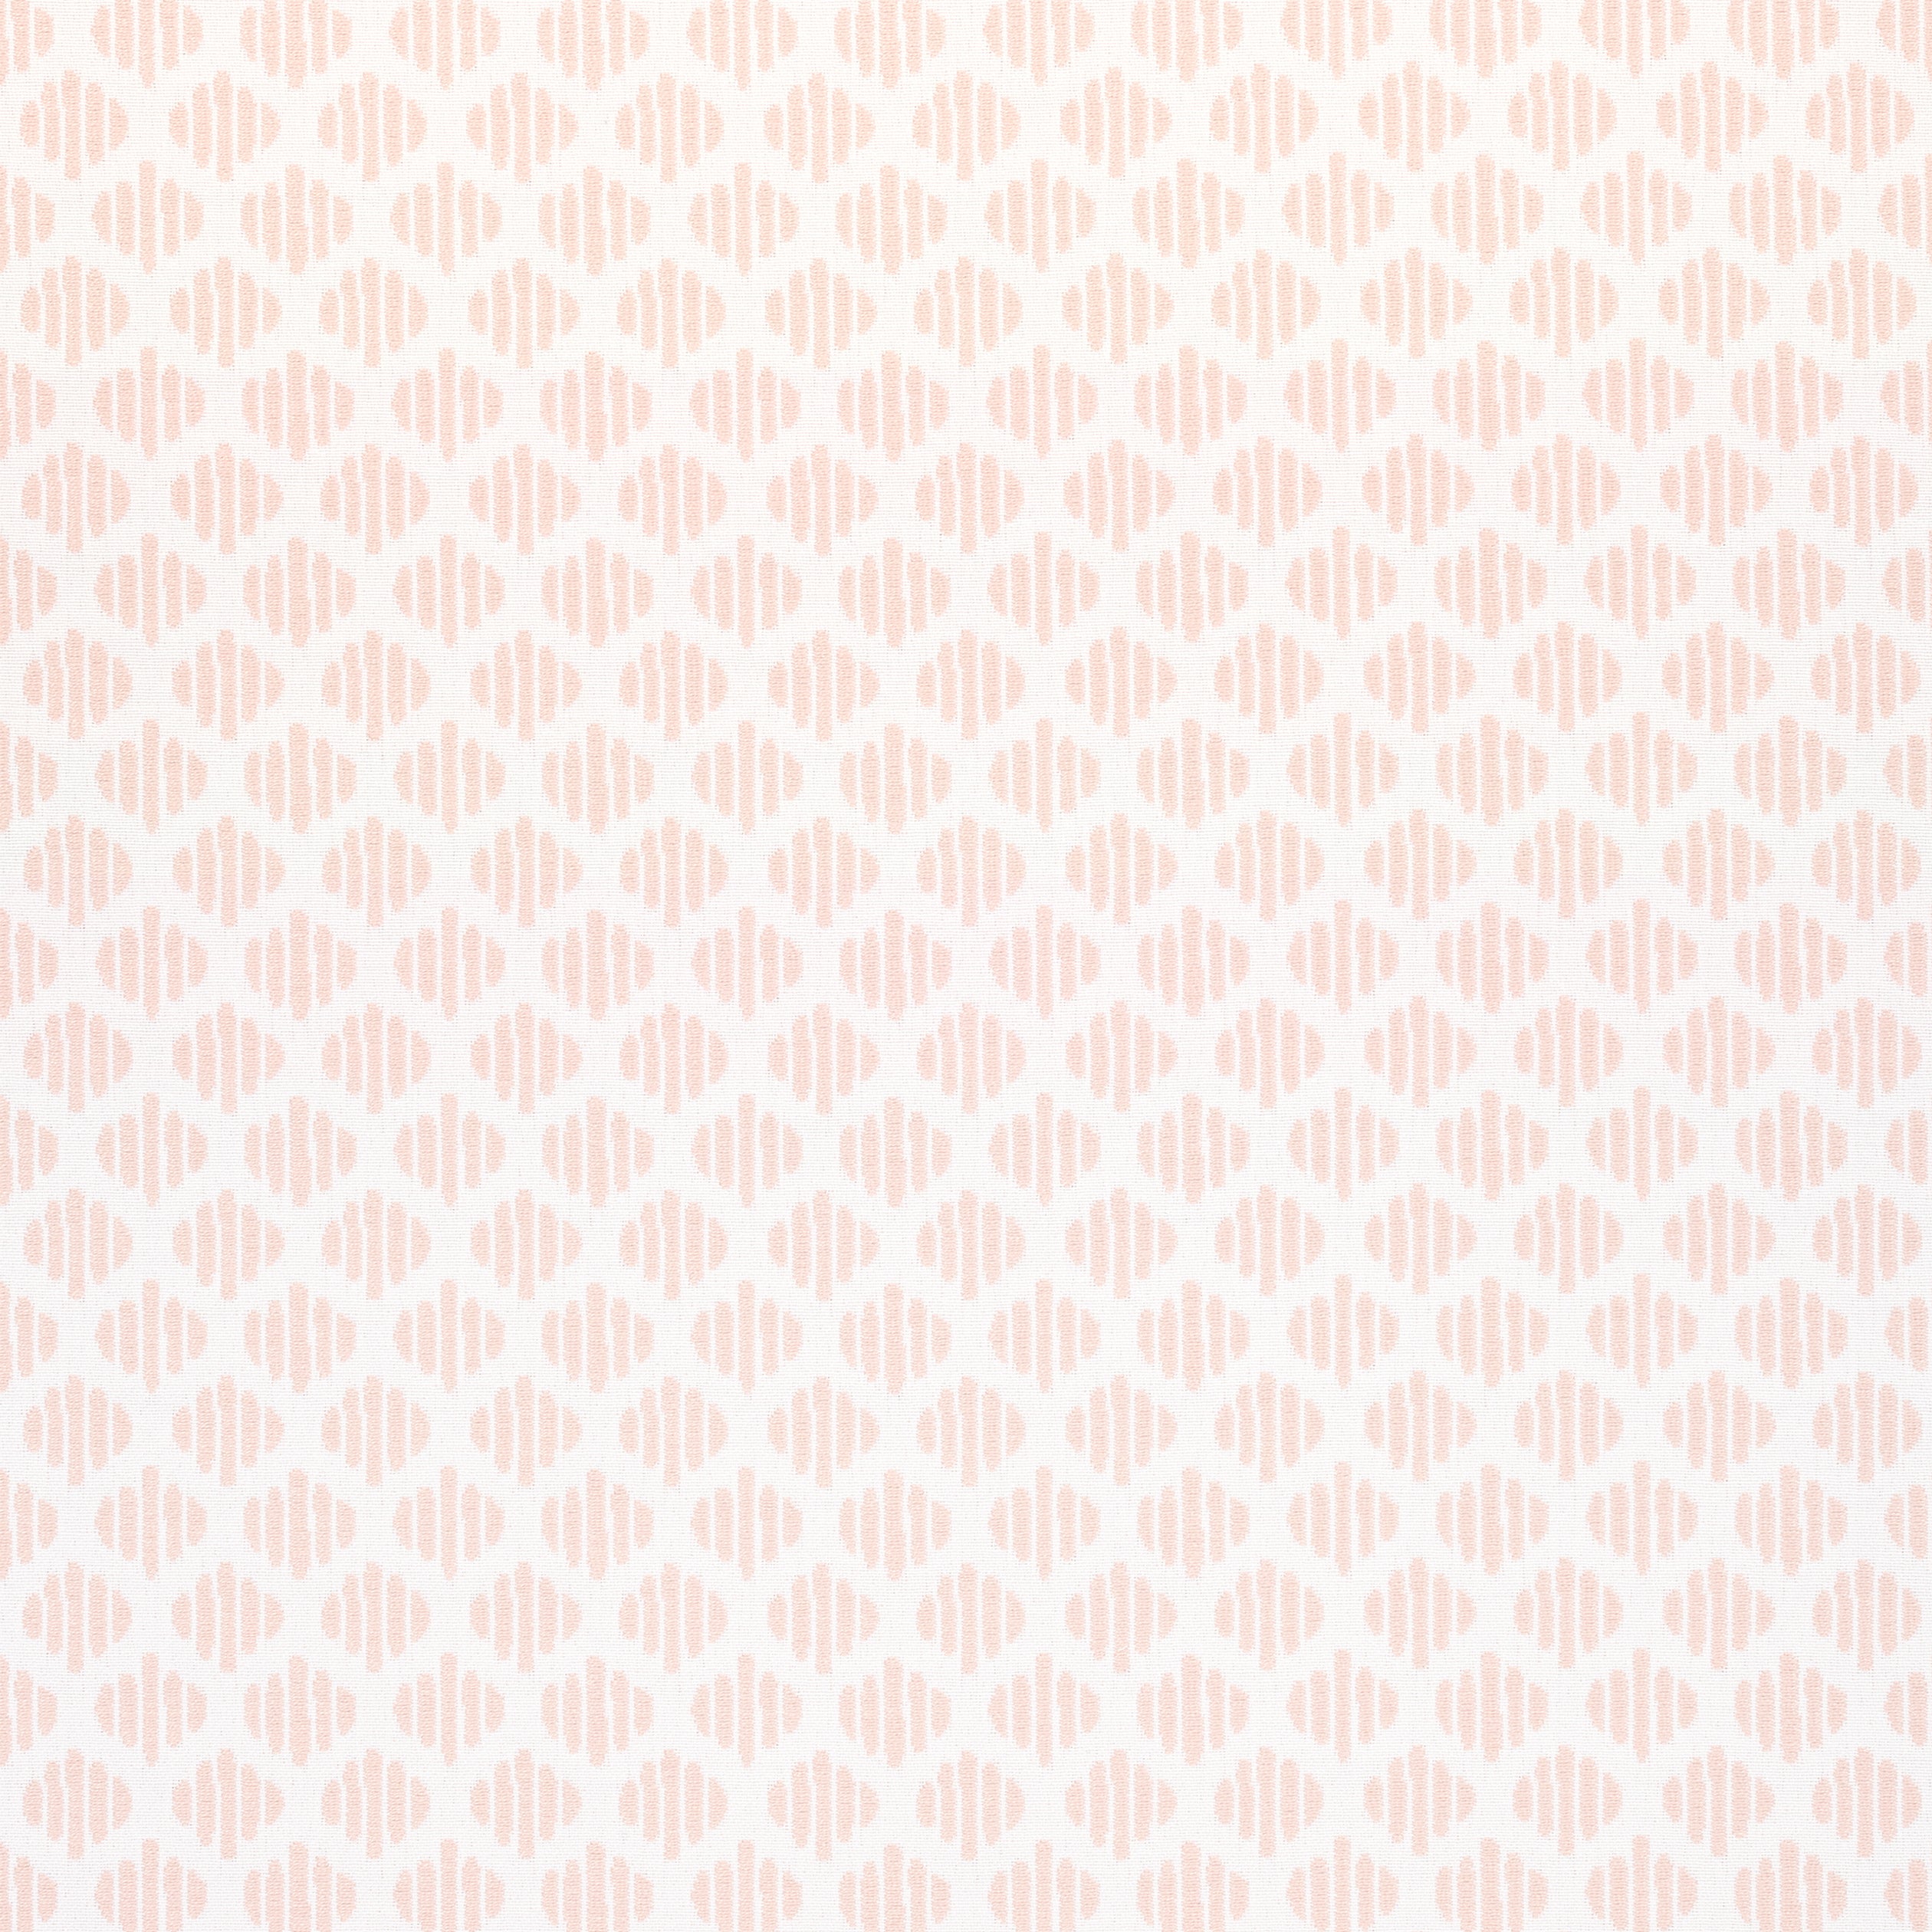 Sadie fabric in blush color - pattern number W73503 - by Thibaut in the Landmark collection